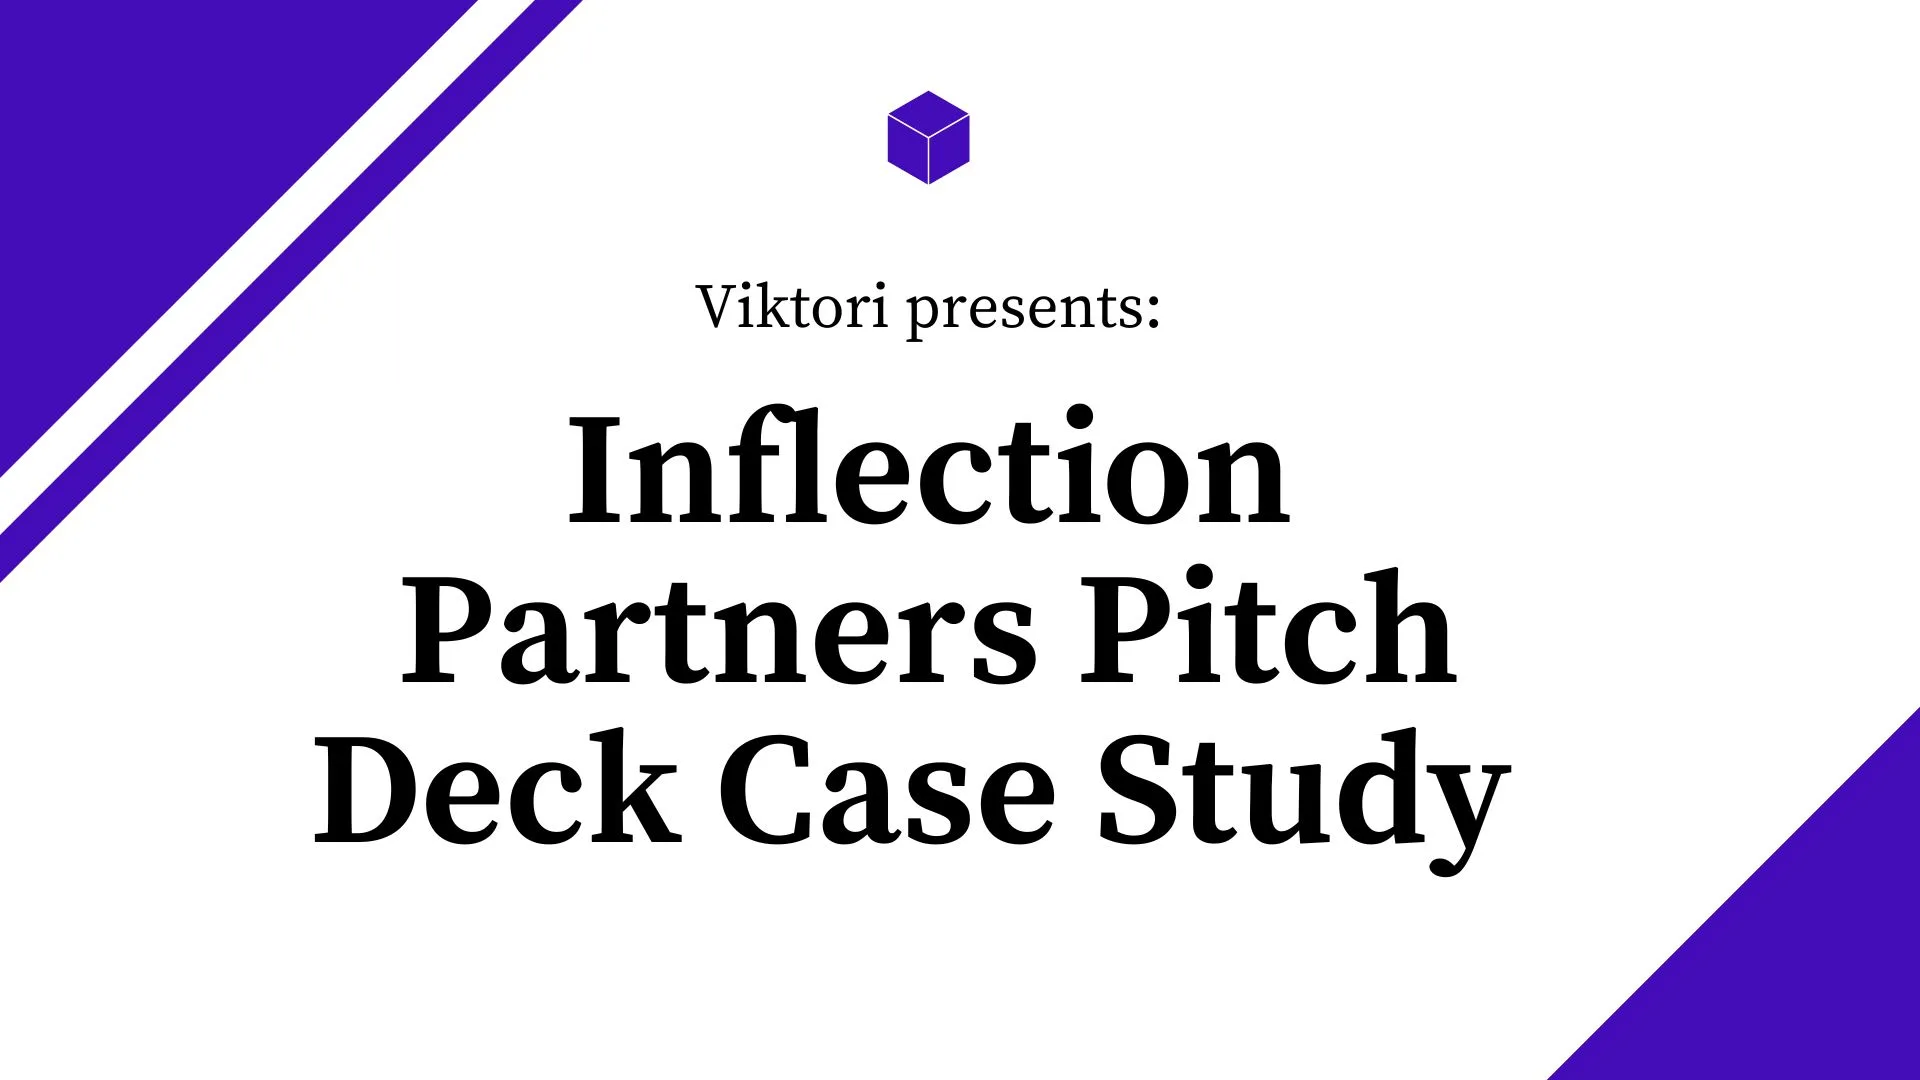 Personal Coaching Pitch Deck Case Study of Inflection Point Partners